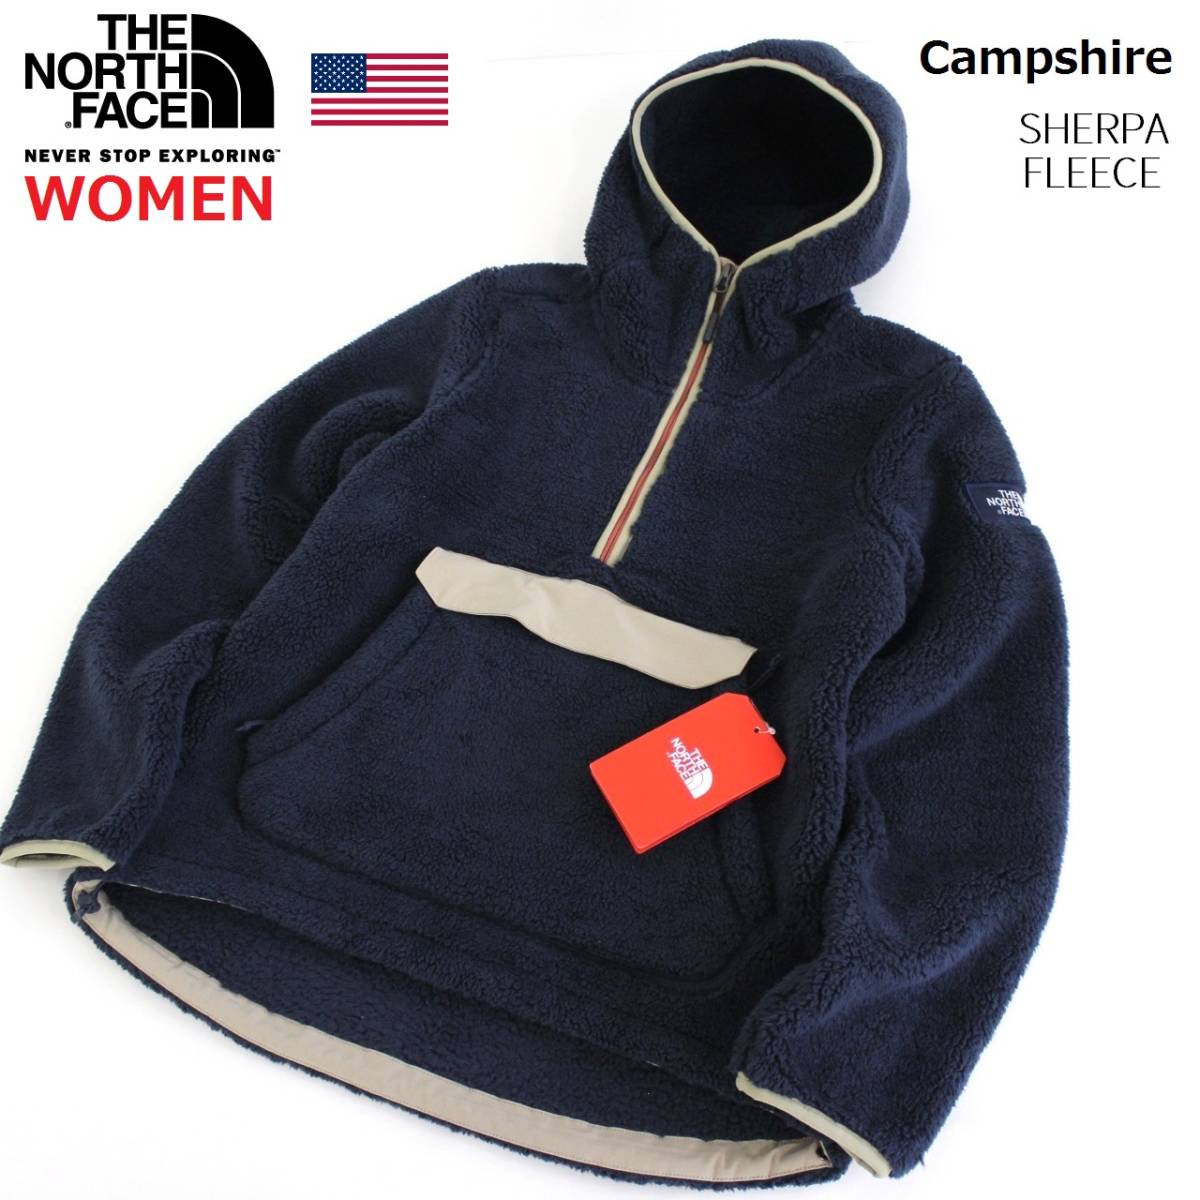 north face campshire sherpa